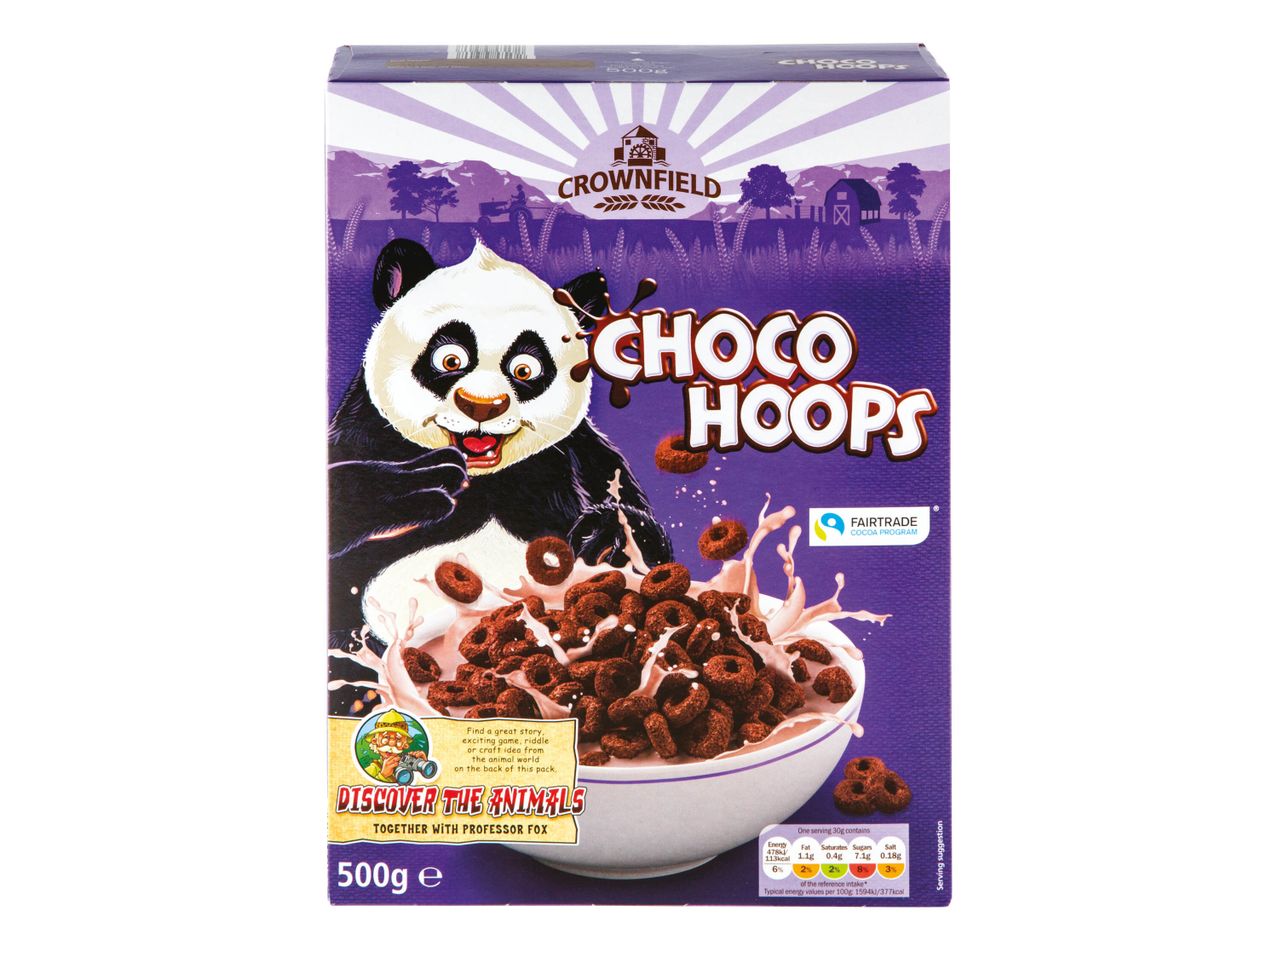 Go to full screen view: Crownfield CHOCO HOOPS - Image 1